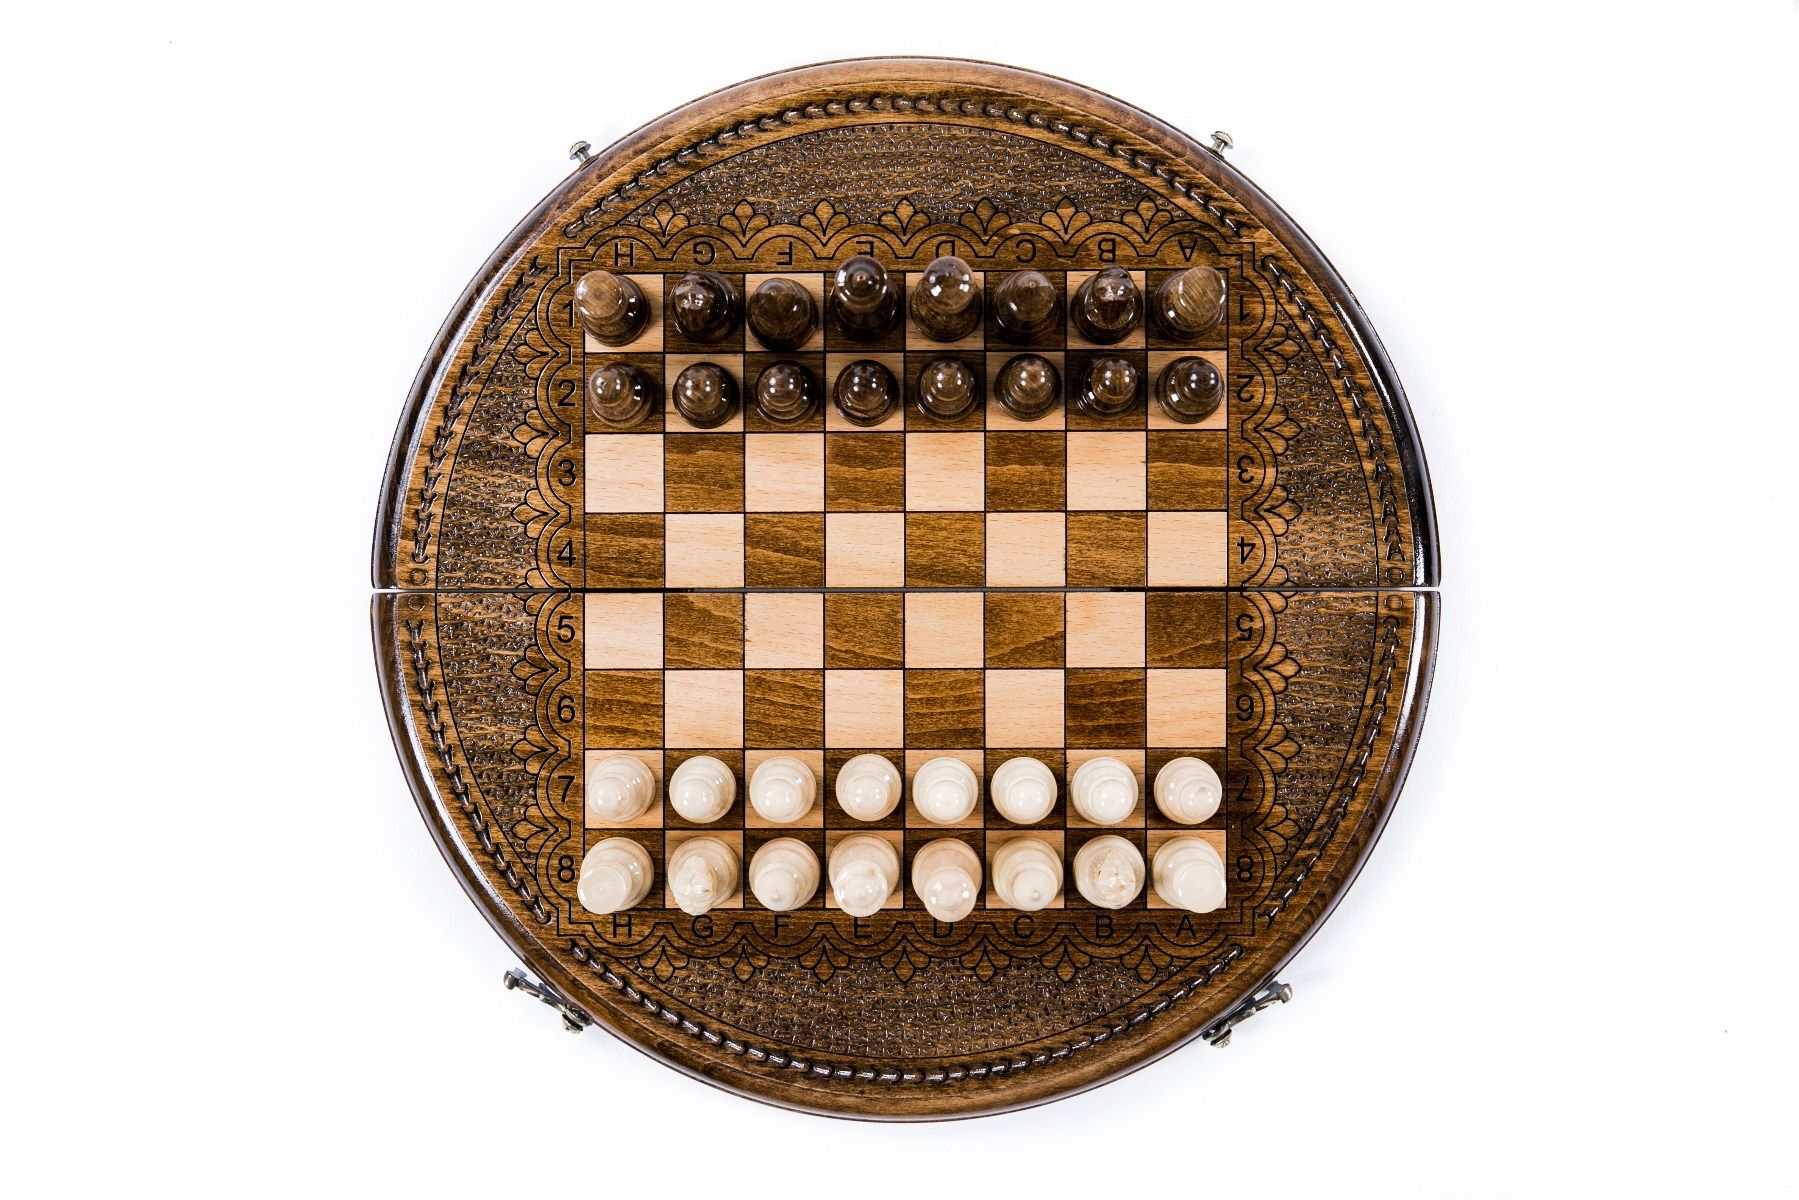 Discover the beauty of chess with a set that stands out for its circular board design, offering a new perspective on strategy and play.